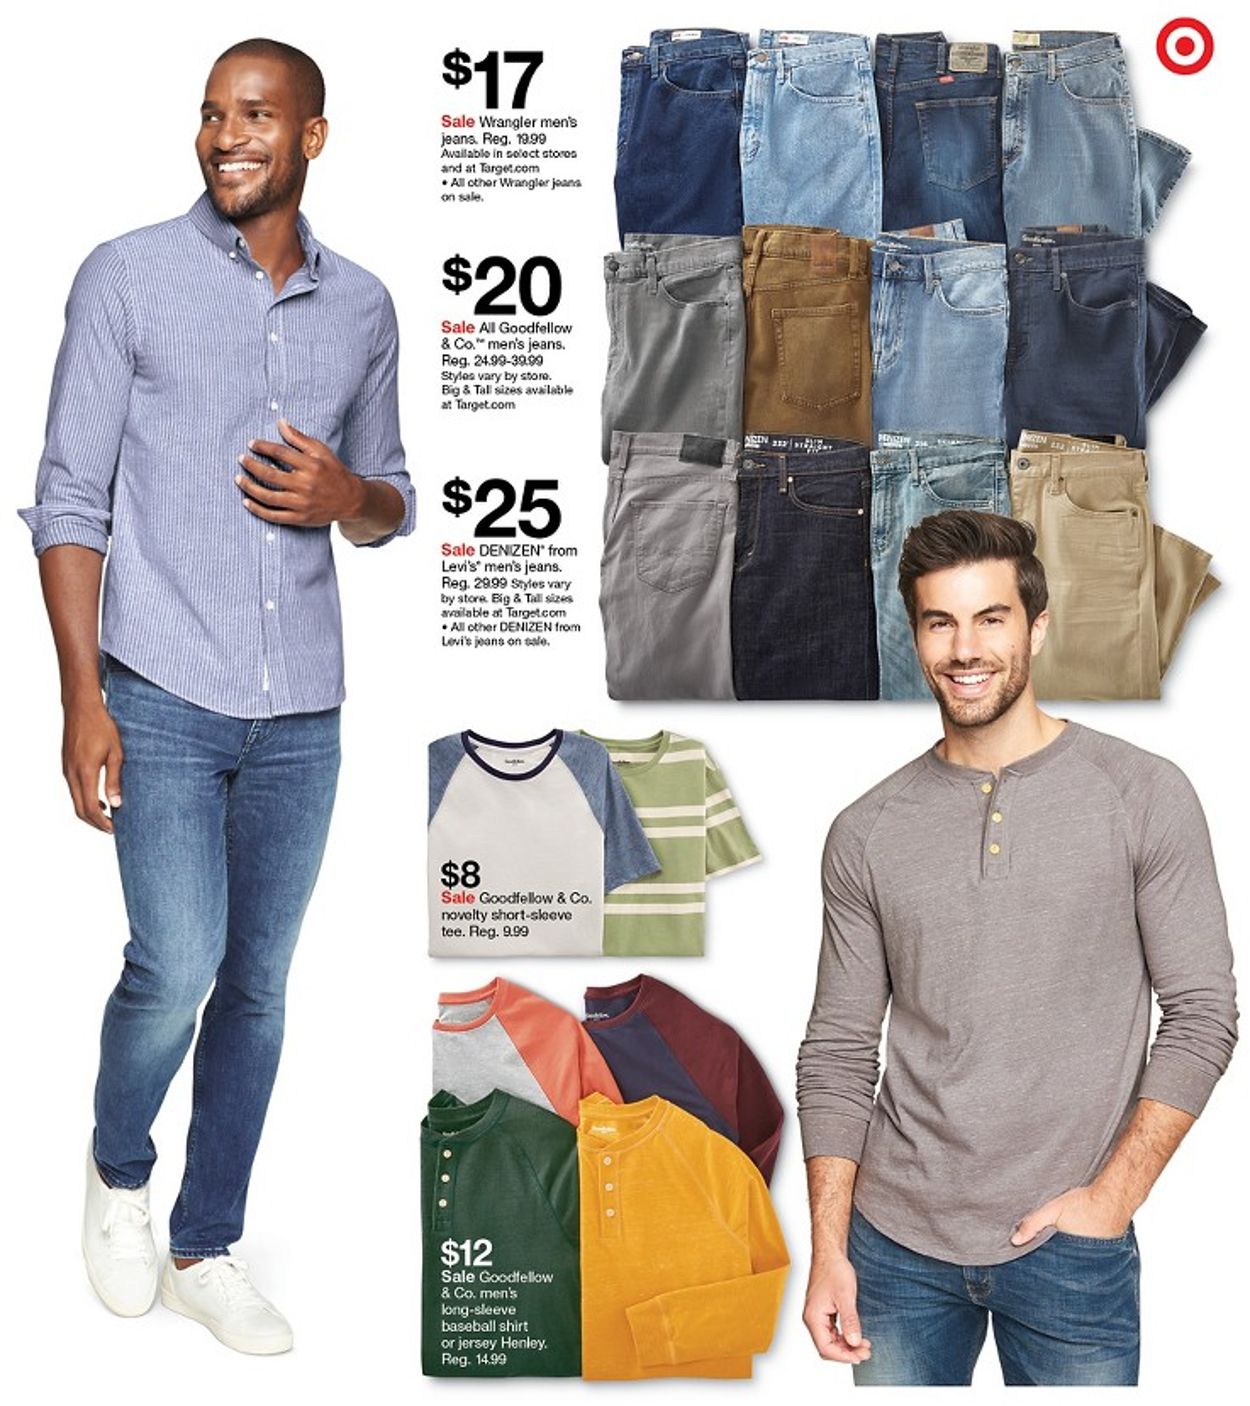 levi jeans at target